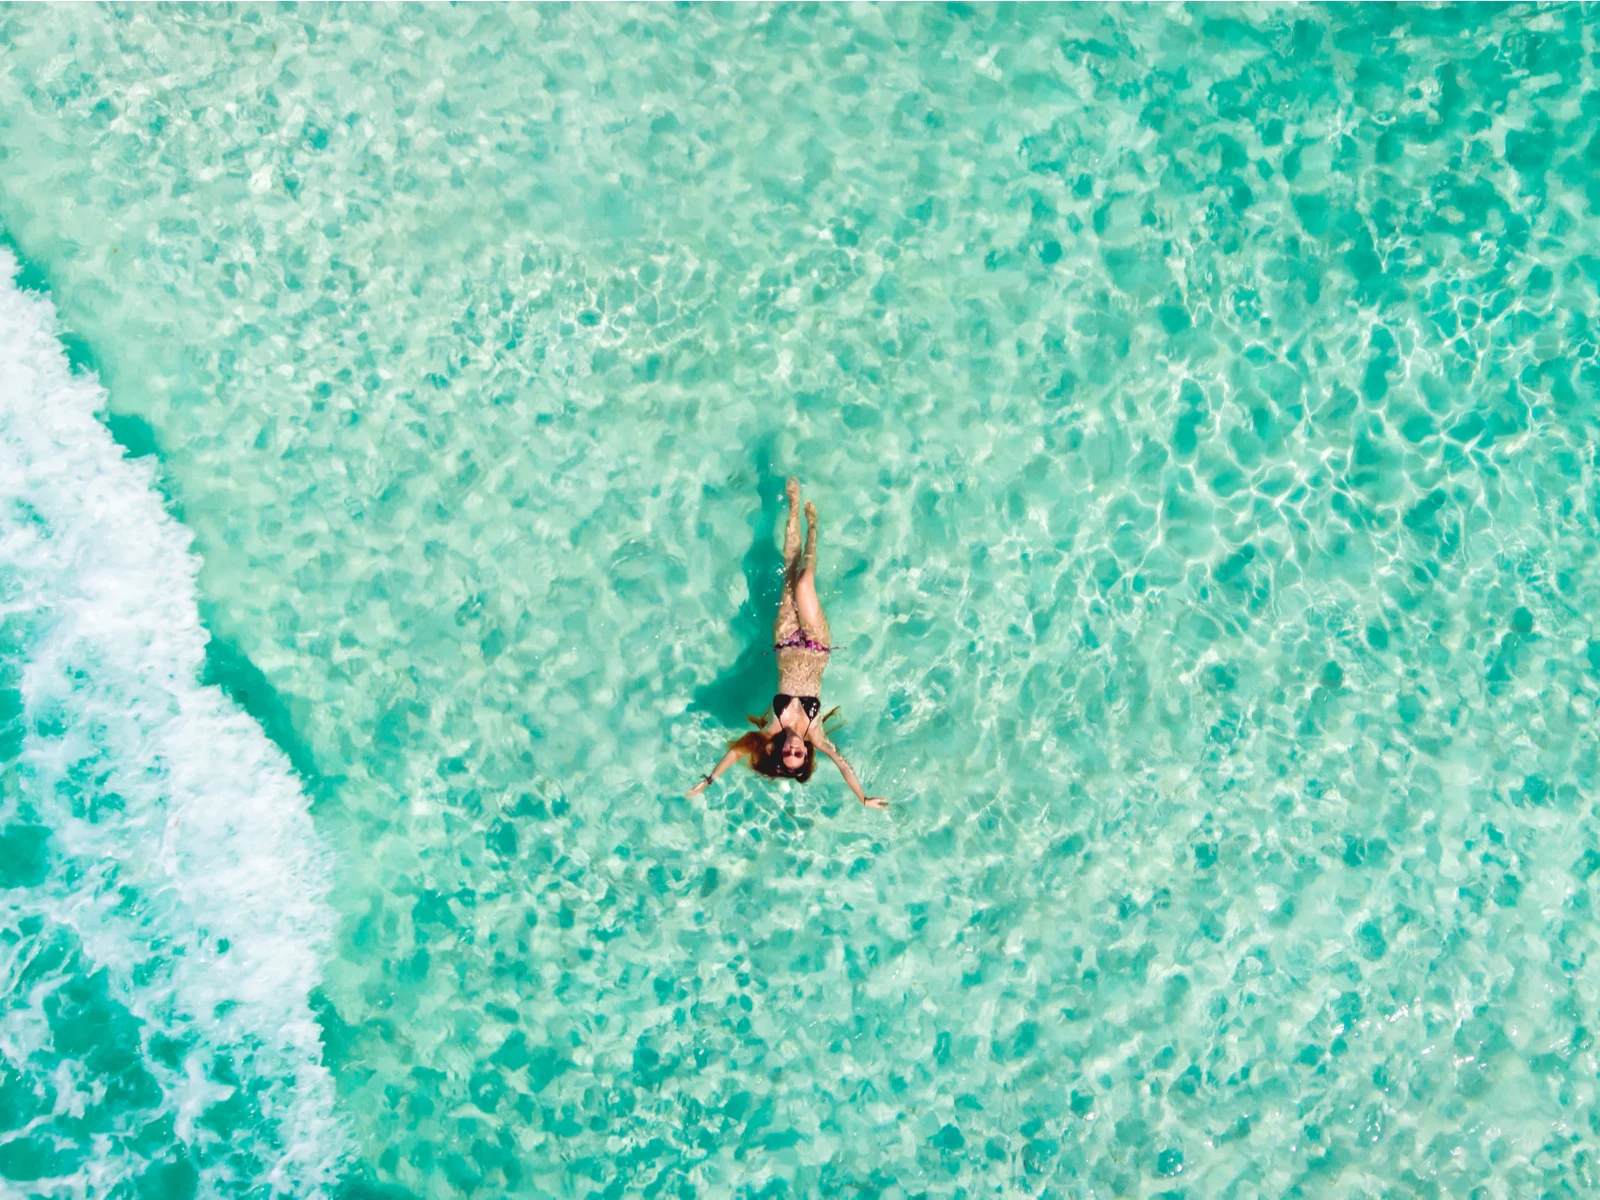 Overhead view of a young woman on her swimwear and sunglasses floating at the shallow waters in one of the best beaches in Cancun